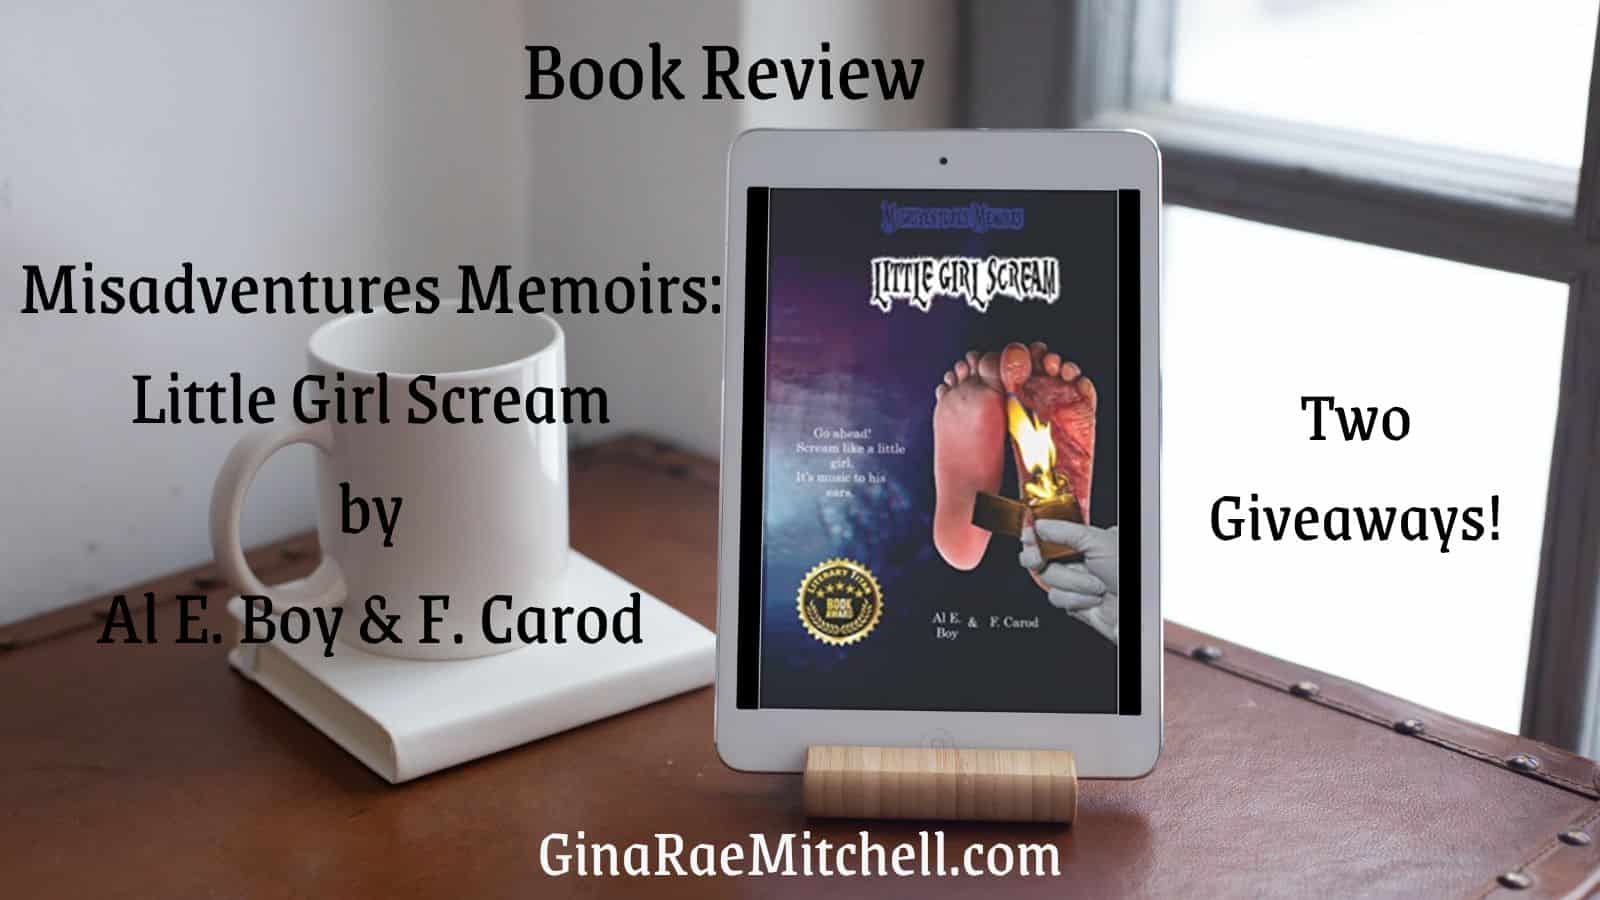 Misadventures Memoirs (Little Girl Scream, #1) by Al E. Boy & F. Carod | Book Review & Giveaway